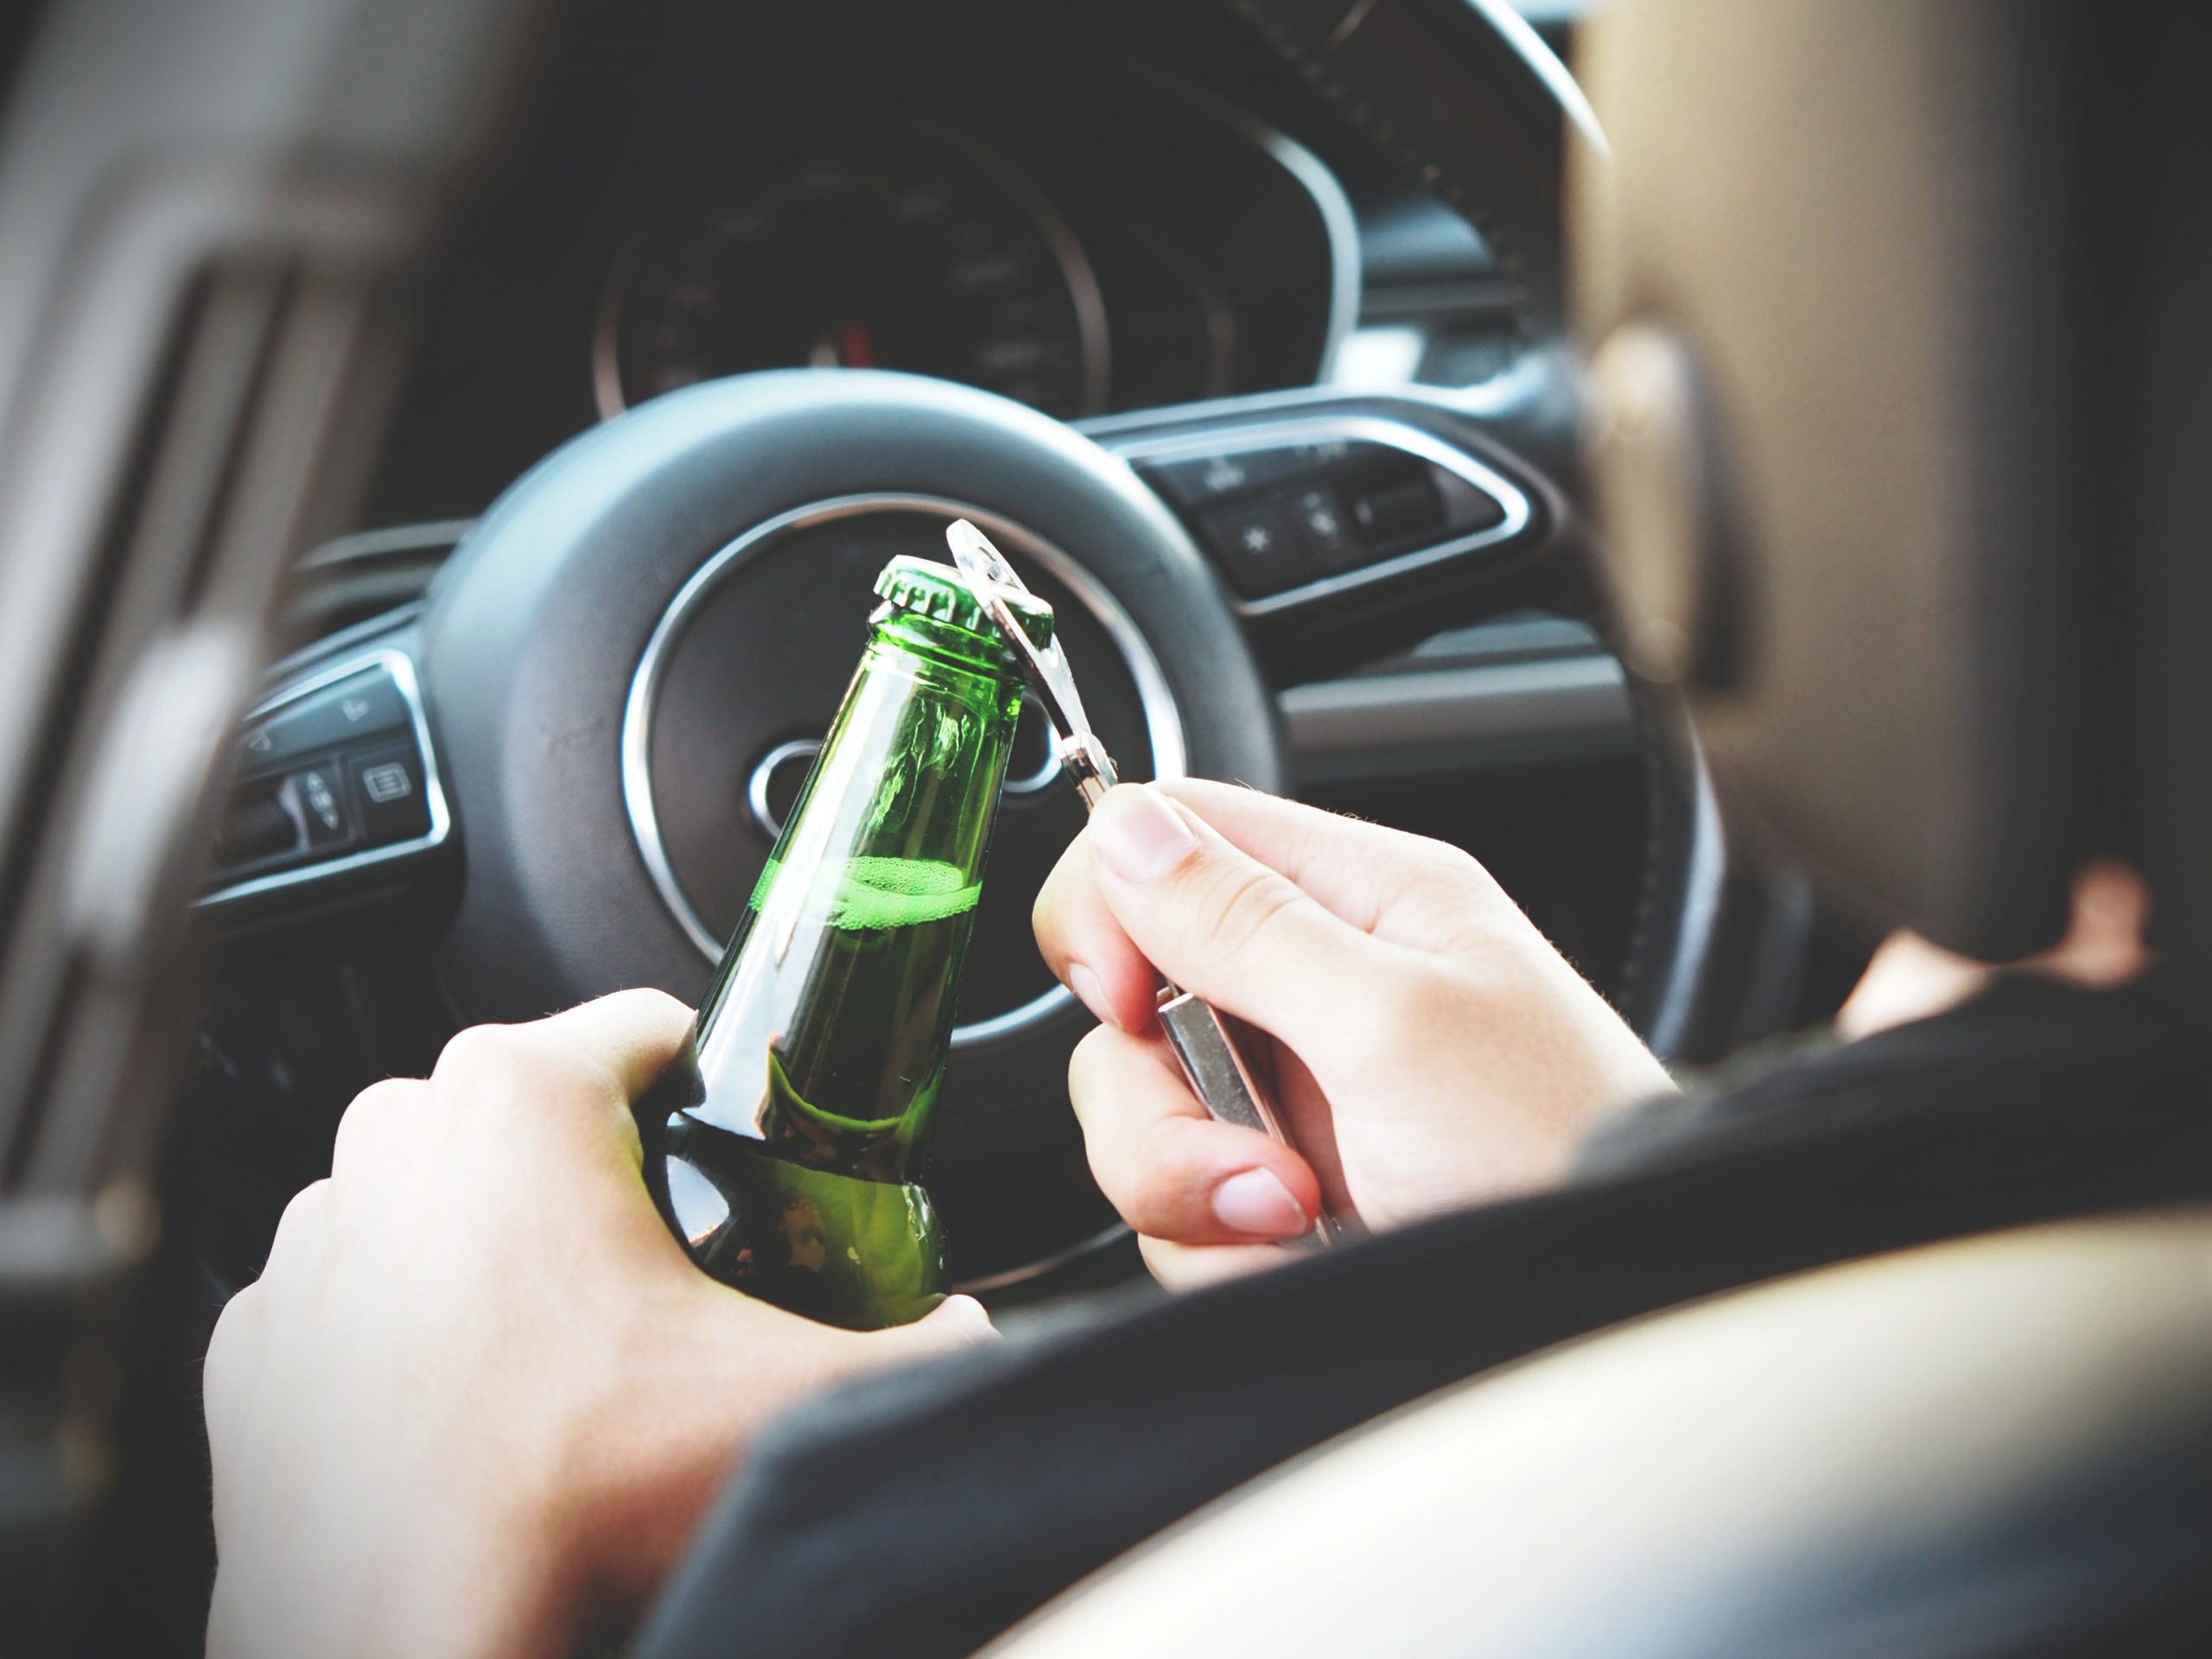 Person opening beer bottle in car